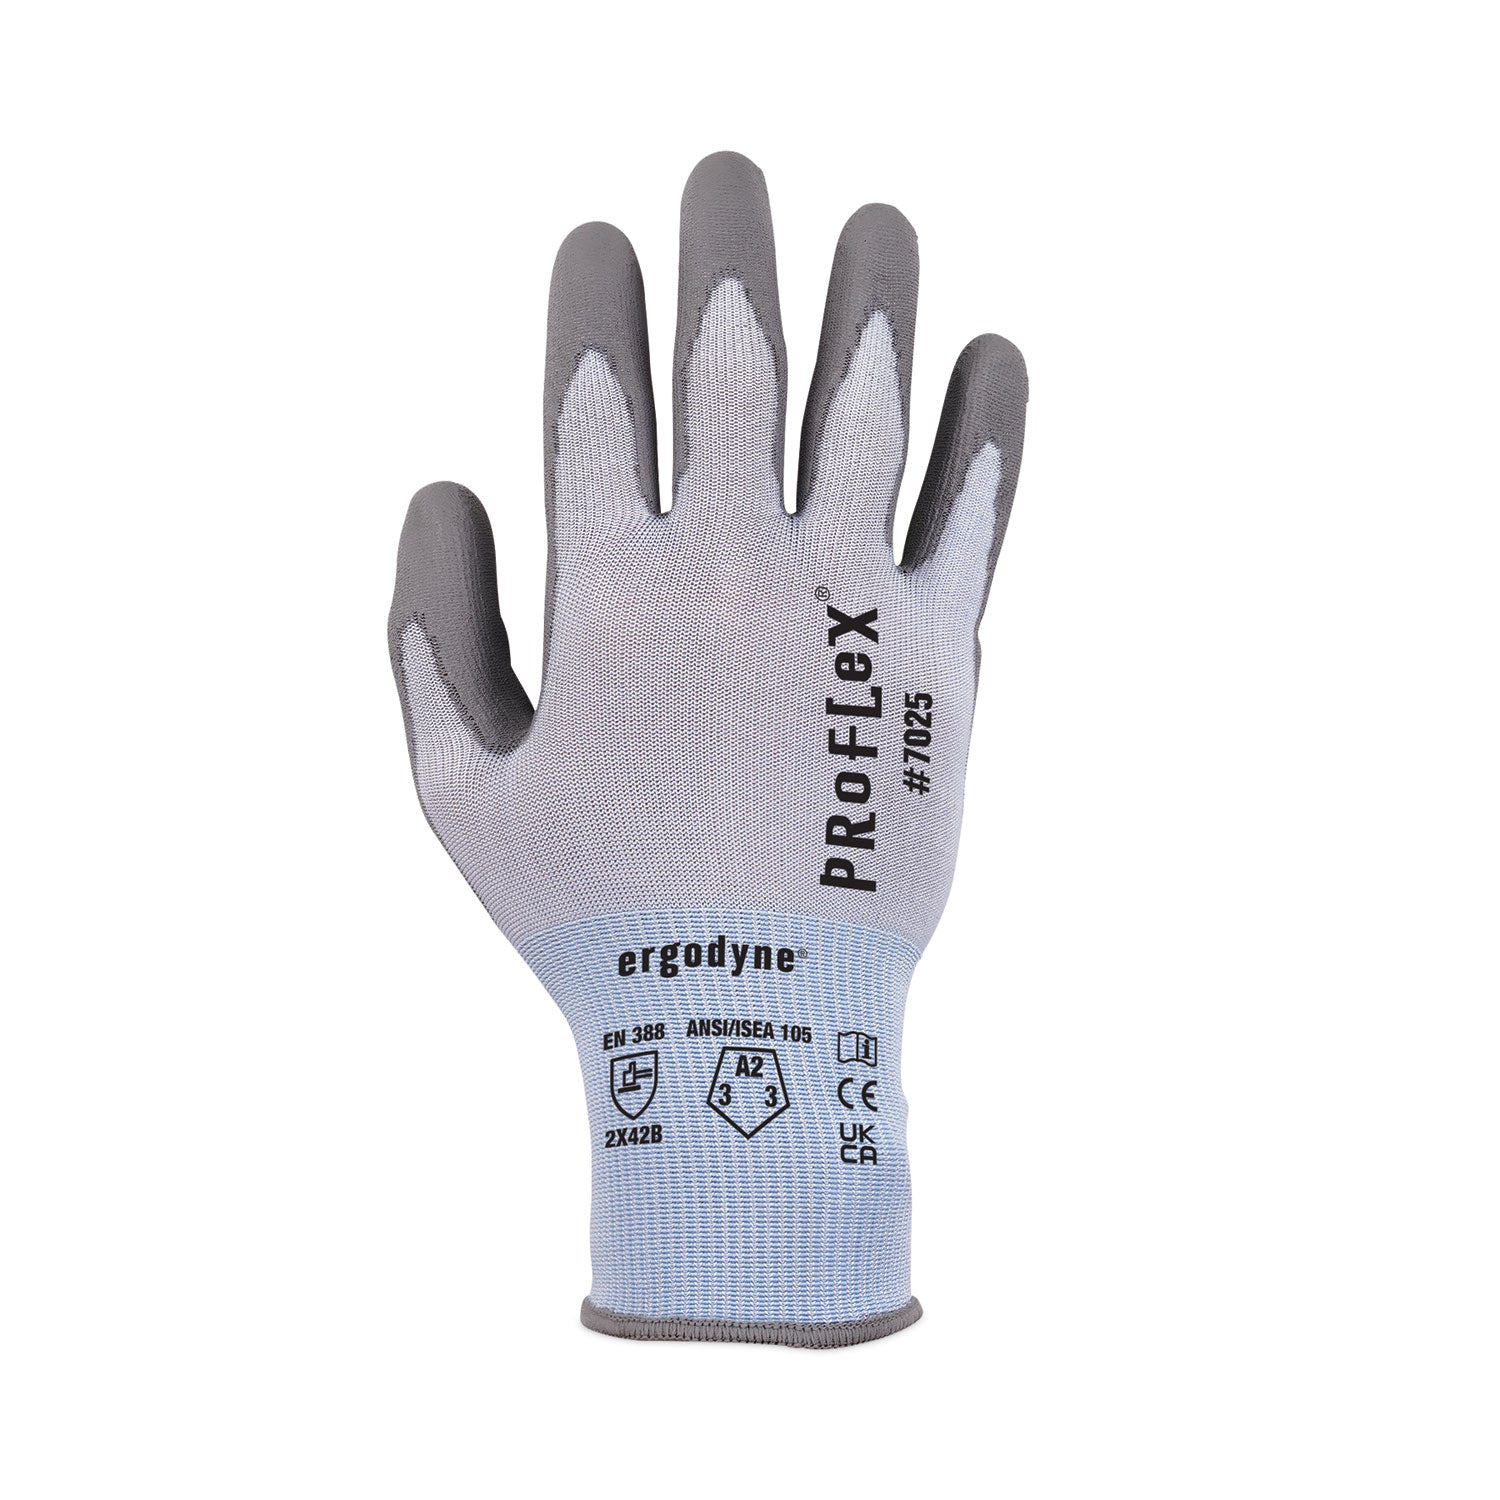 proflex-7025-ansi-a2-pu-coated-cr-gloves-blue-medium-pair-ships-in-1-3-business-days_ego10433 - 2